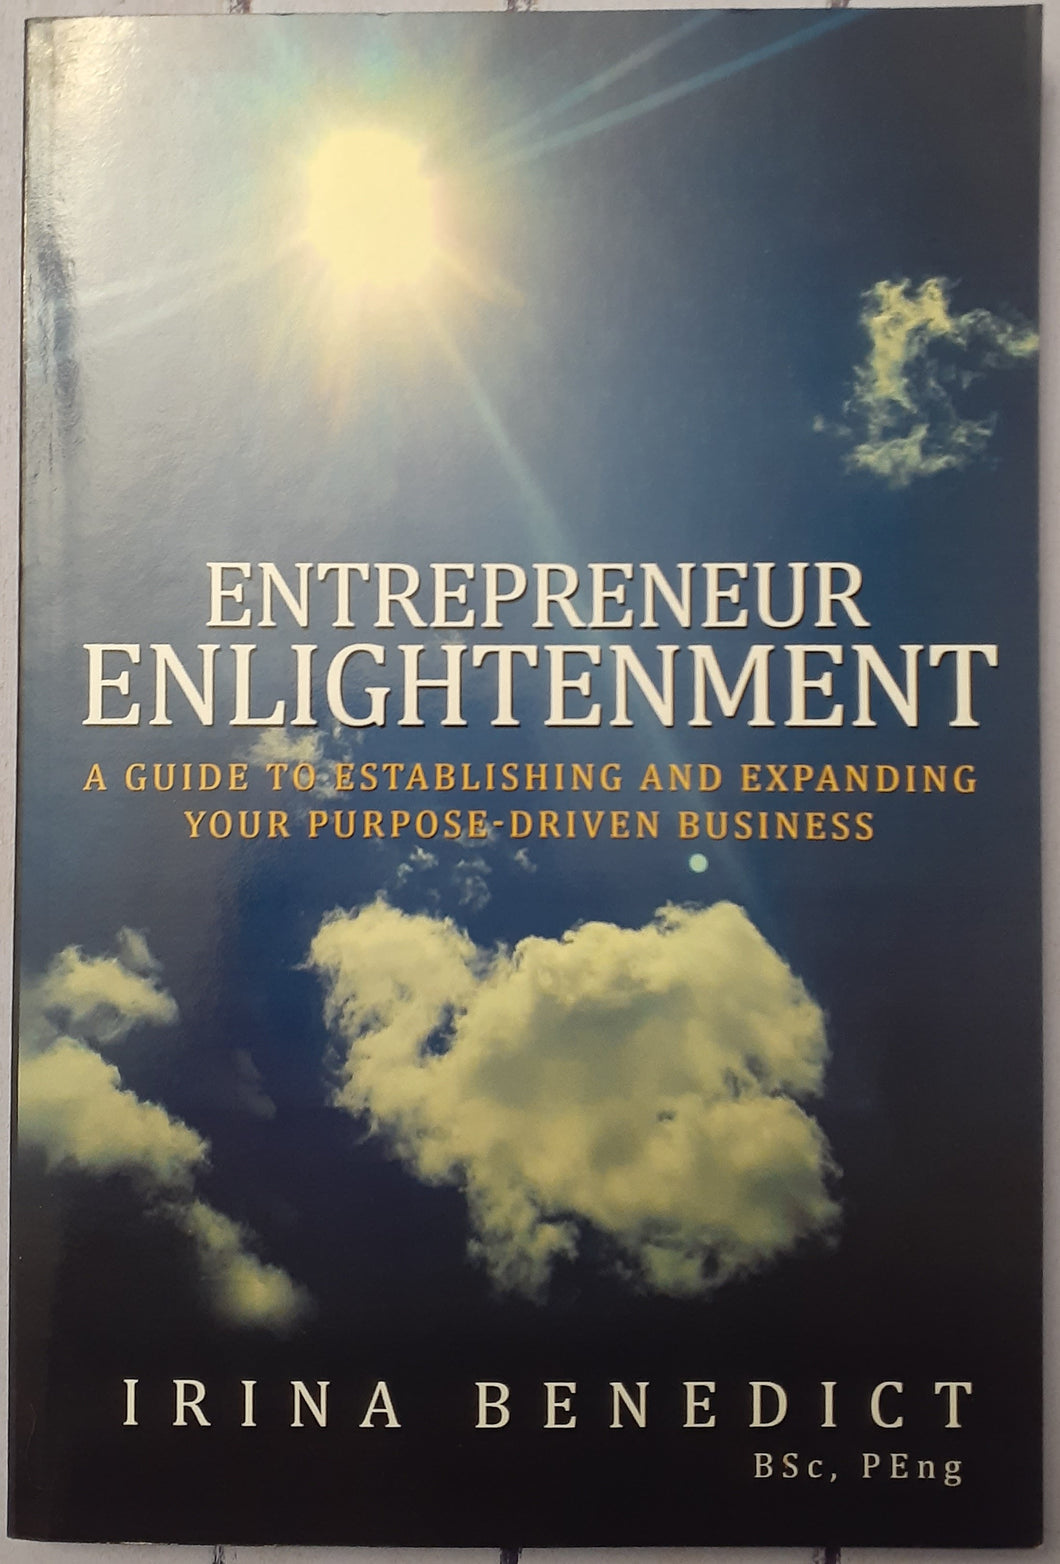 Entreprenuer Enlightenment : A Guide to Establishing and Expanding Your Purpose-Driven Business